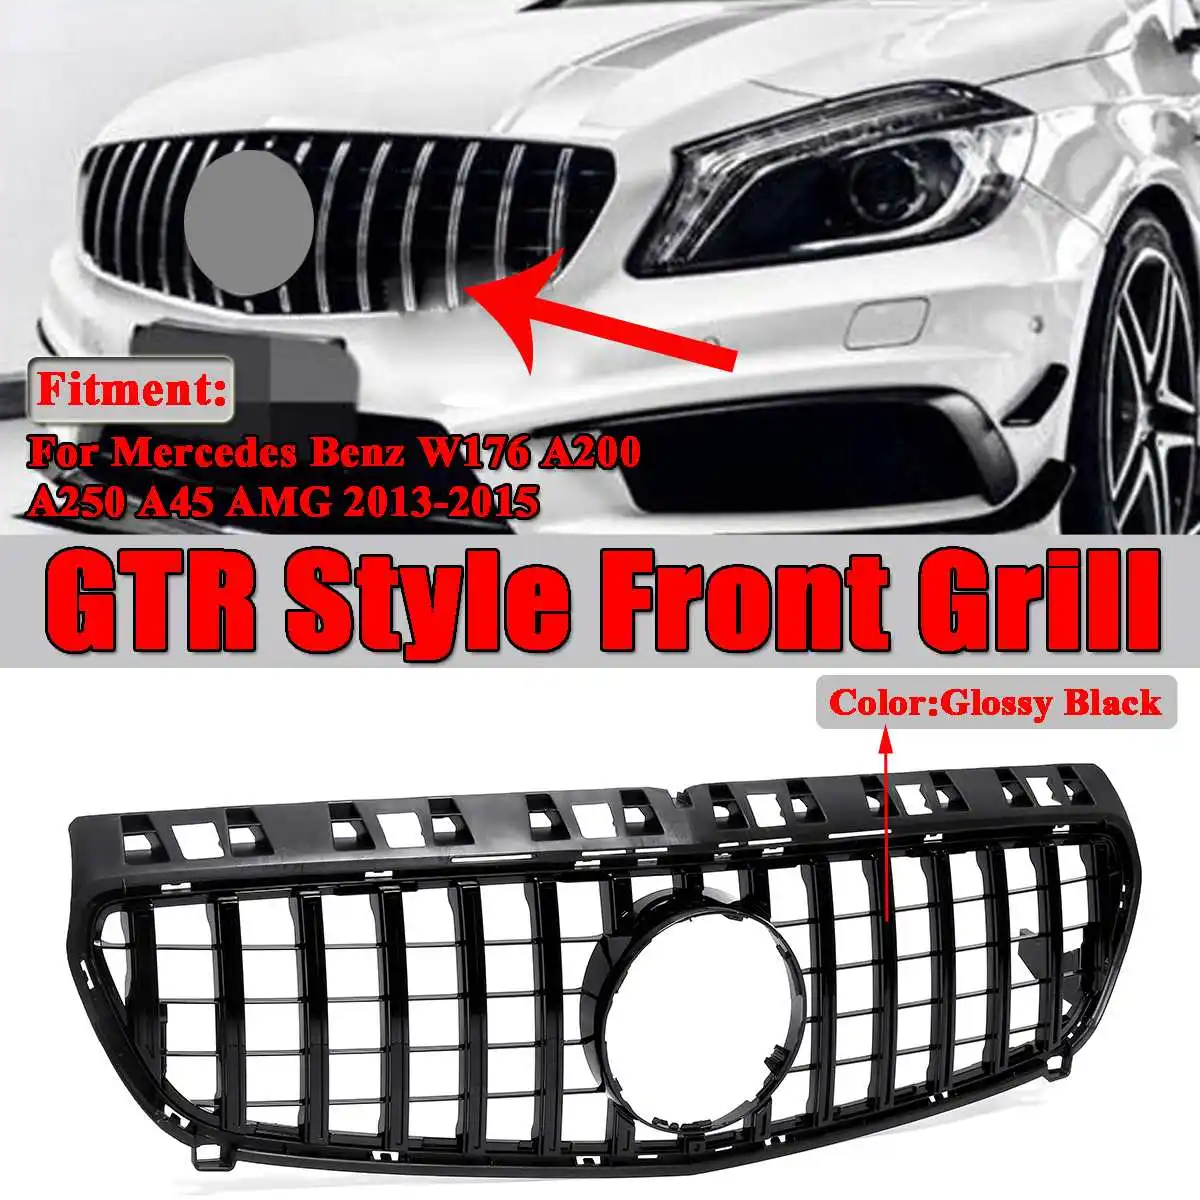 

Car For GTR Style Front Racing Grill Grills For Mercedes For Benz Facelift W176 A180 A200 A250 A45 AMG 2013-2015 Without Emblem